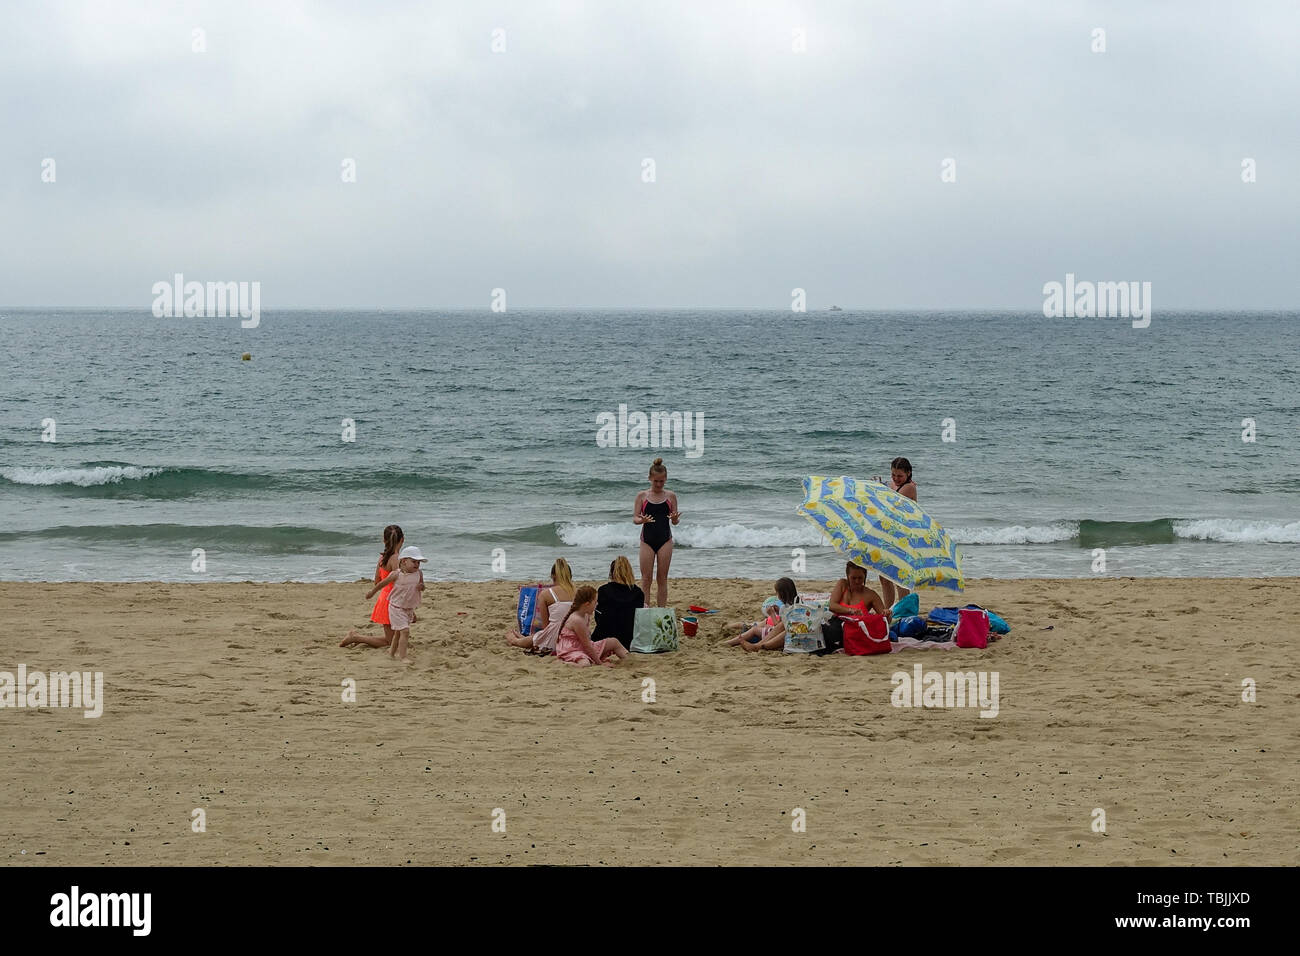 Bournemouth, Dorset, UK, 2nd June 2019. A cool start in the south of England meant that some visitors to the beach were well wrapped up in coats and hoodies. This family braved the chill in their swimming costumes.  The forecast was for 29 degrees Celsius but has only reached 20 degrees mid morning with a cool wind. Credit: Mick Flynn/Alamy Live News Stock Photo